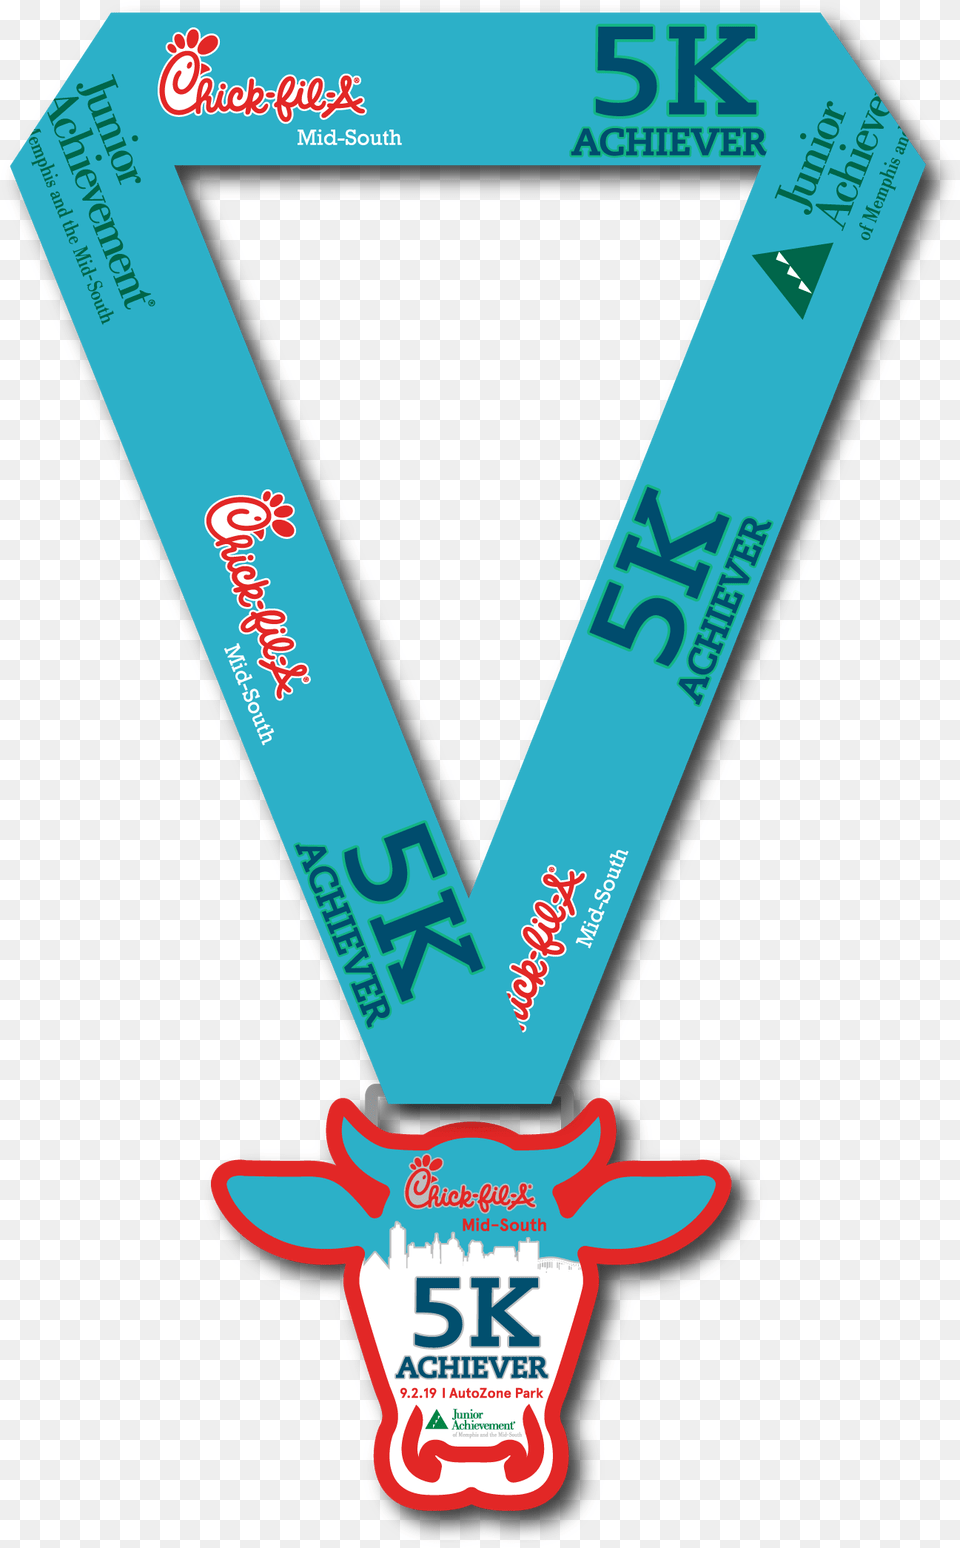 Chick Fil A 5k Medals Png